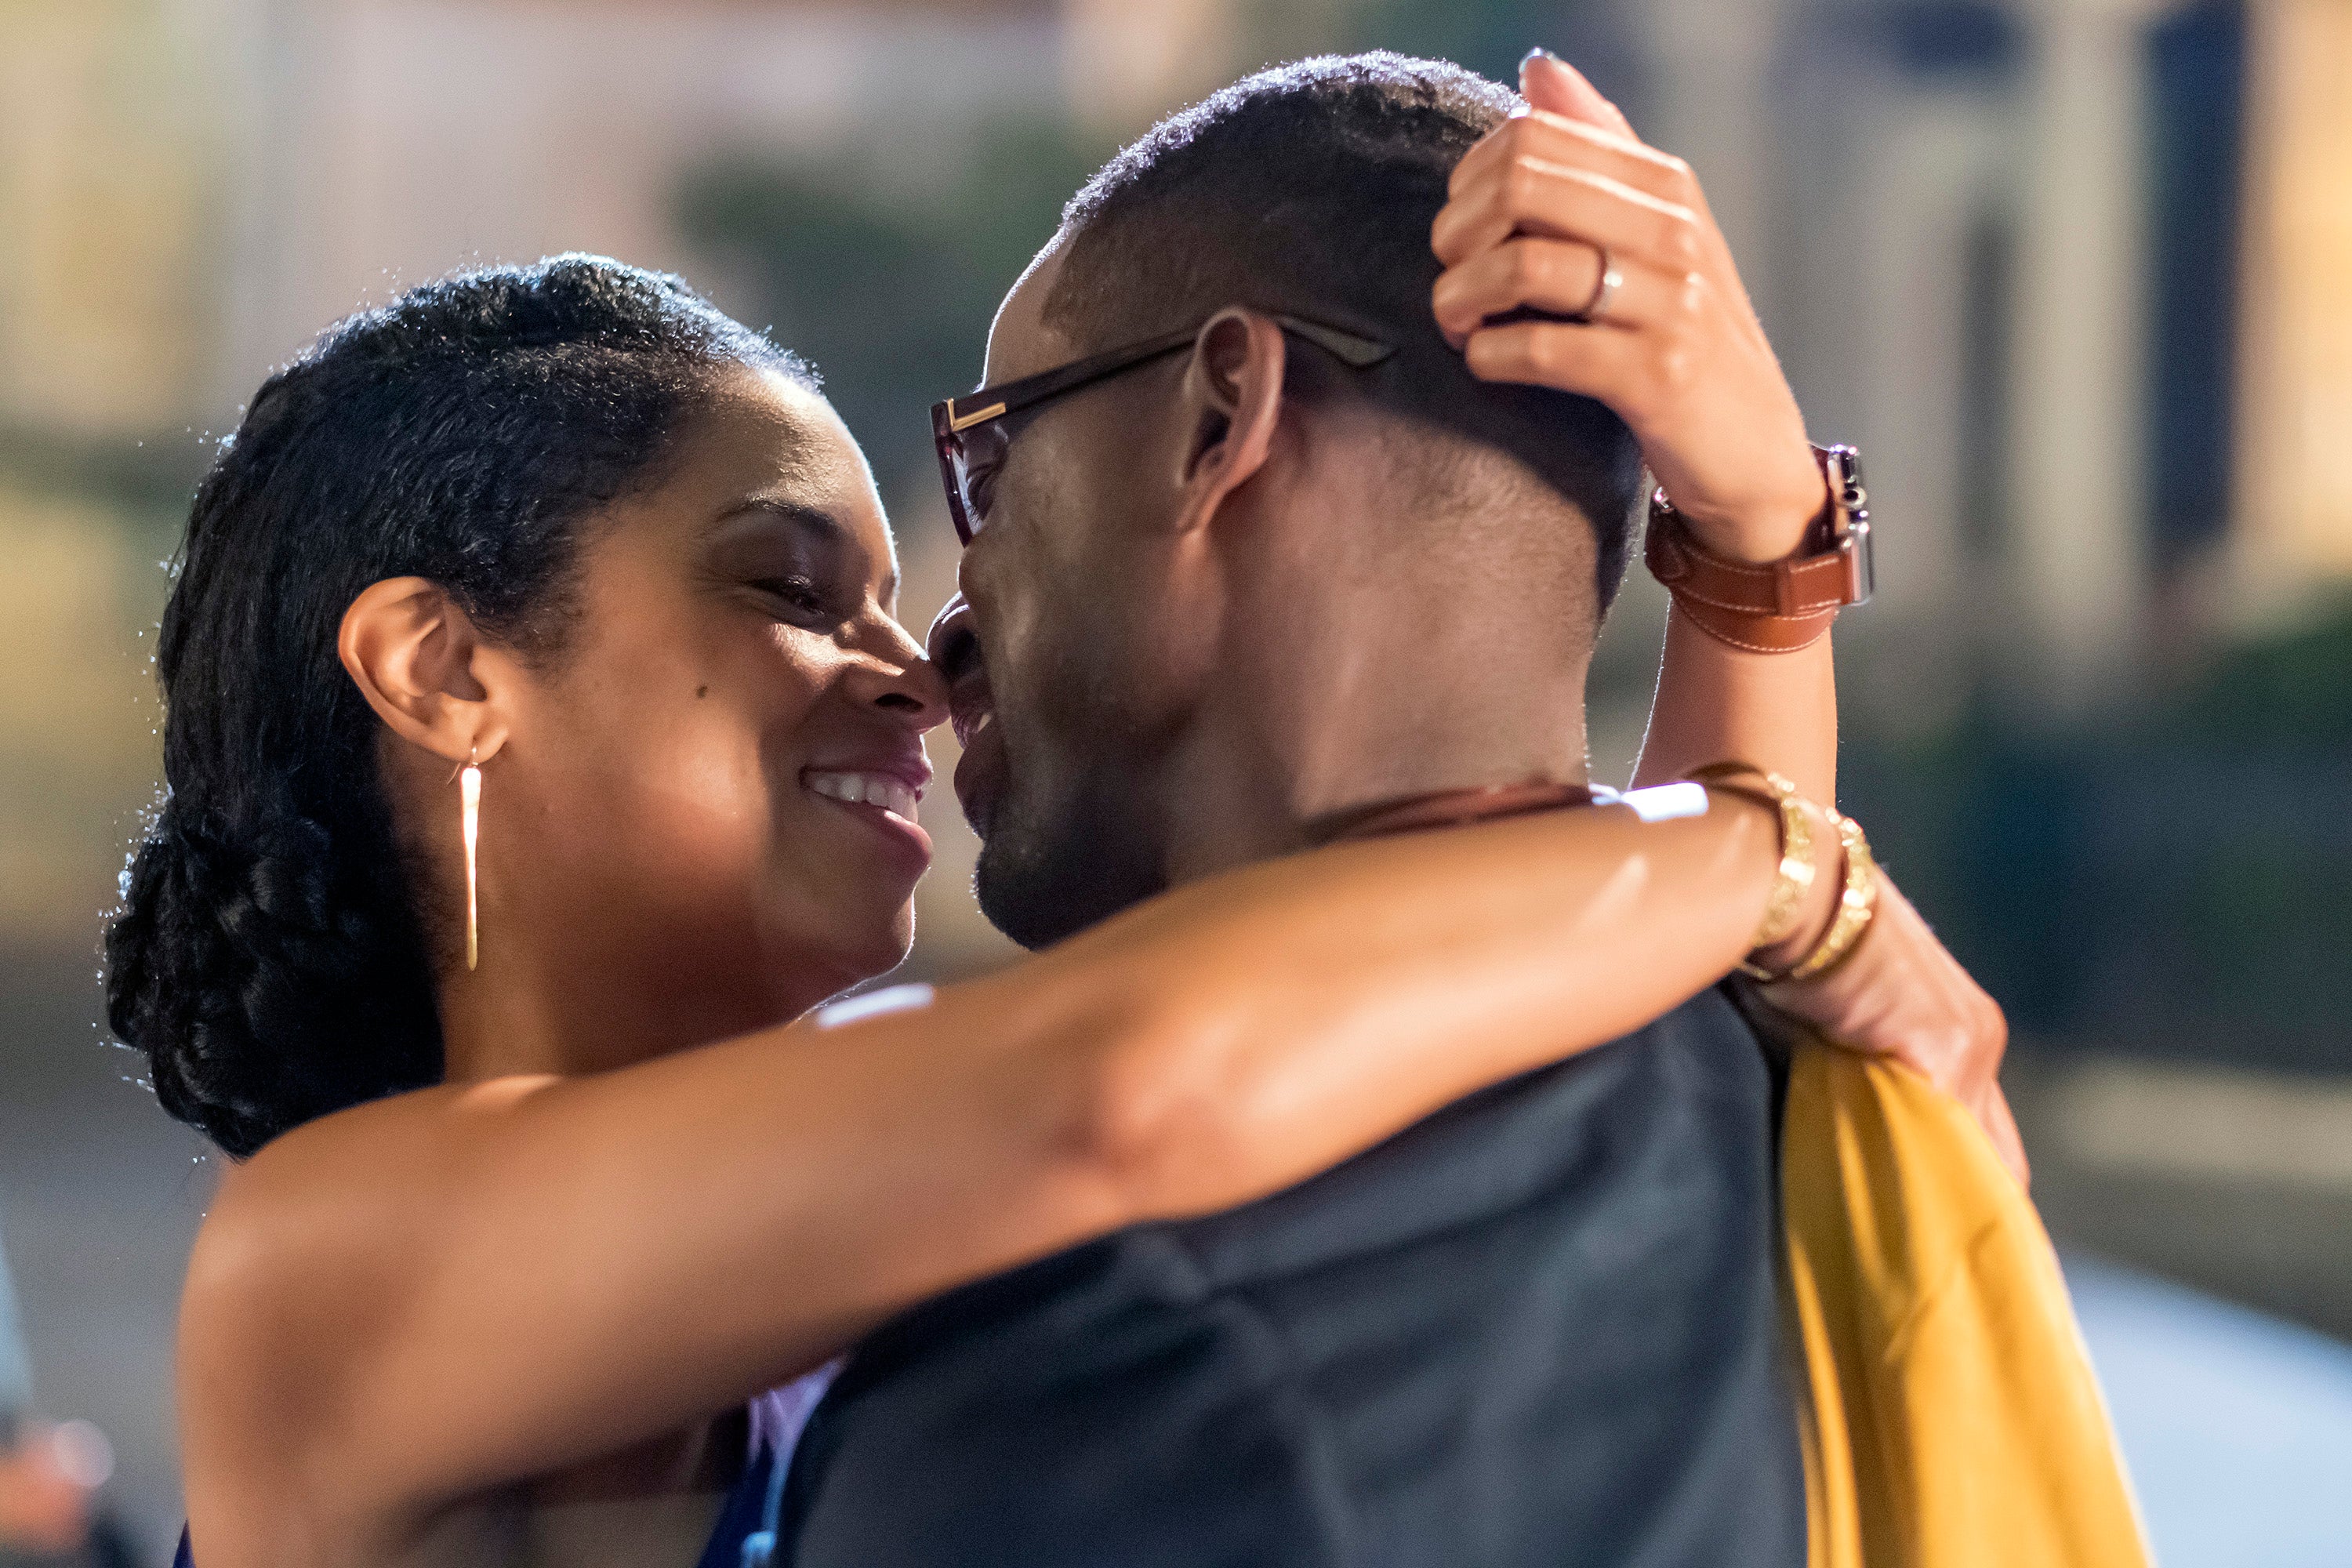 How Martin And Gina Became The Perfect Inspiration For Our Favorite 'This is Us' Couple
